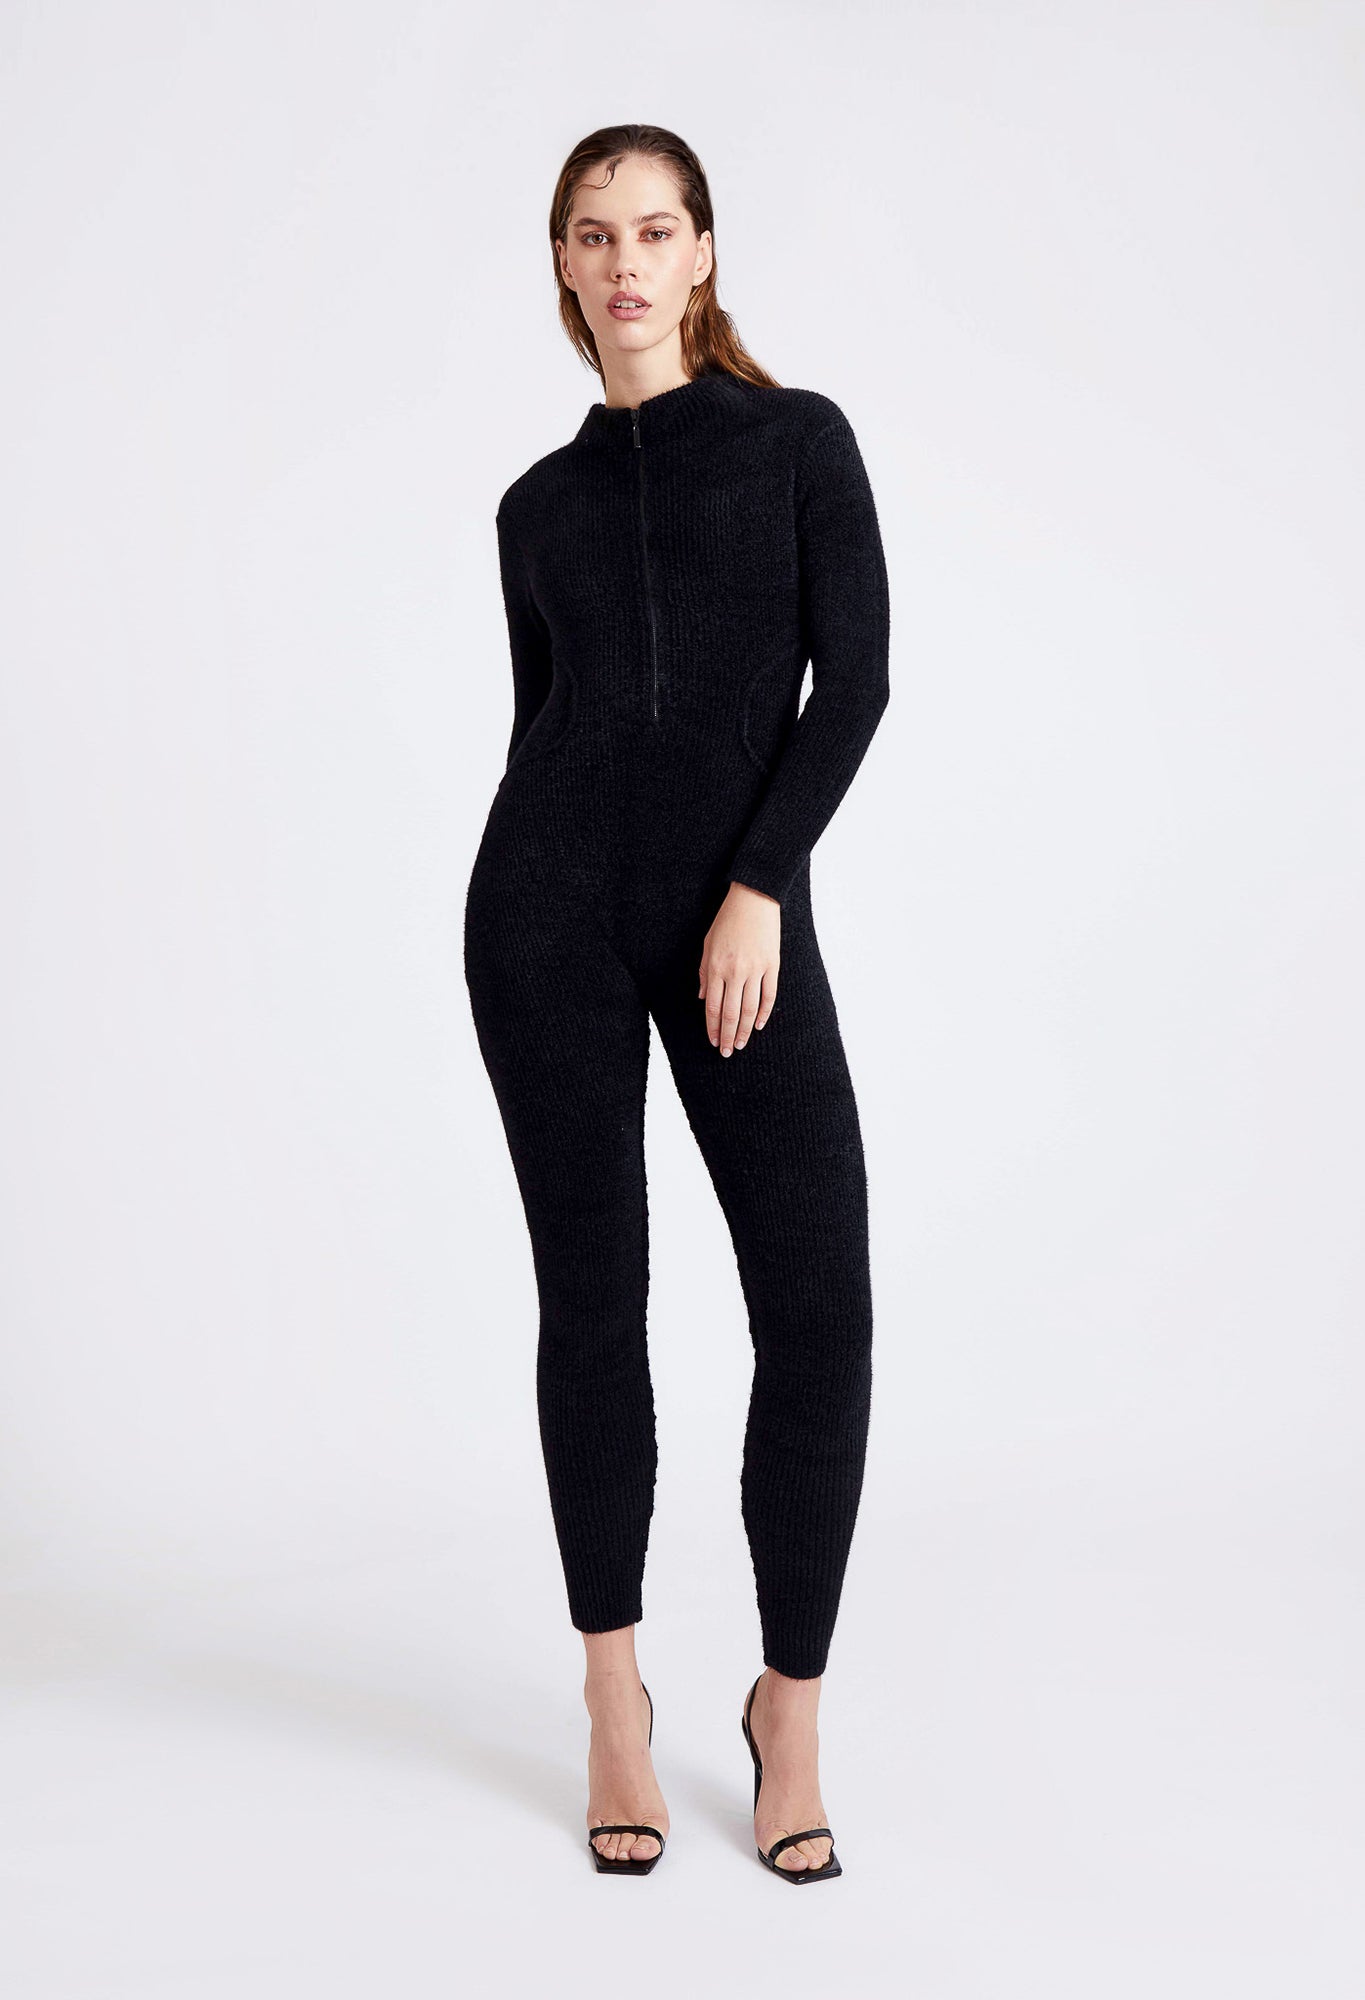 Wool Knit Catsuit - Panther